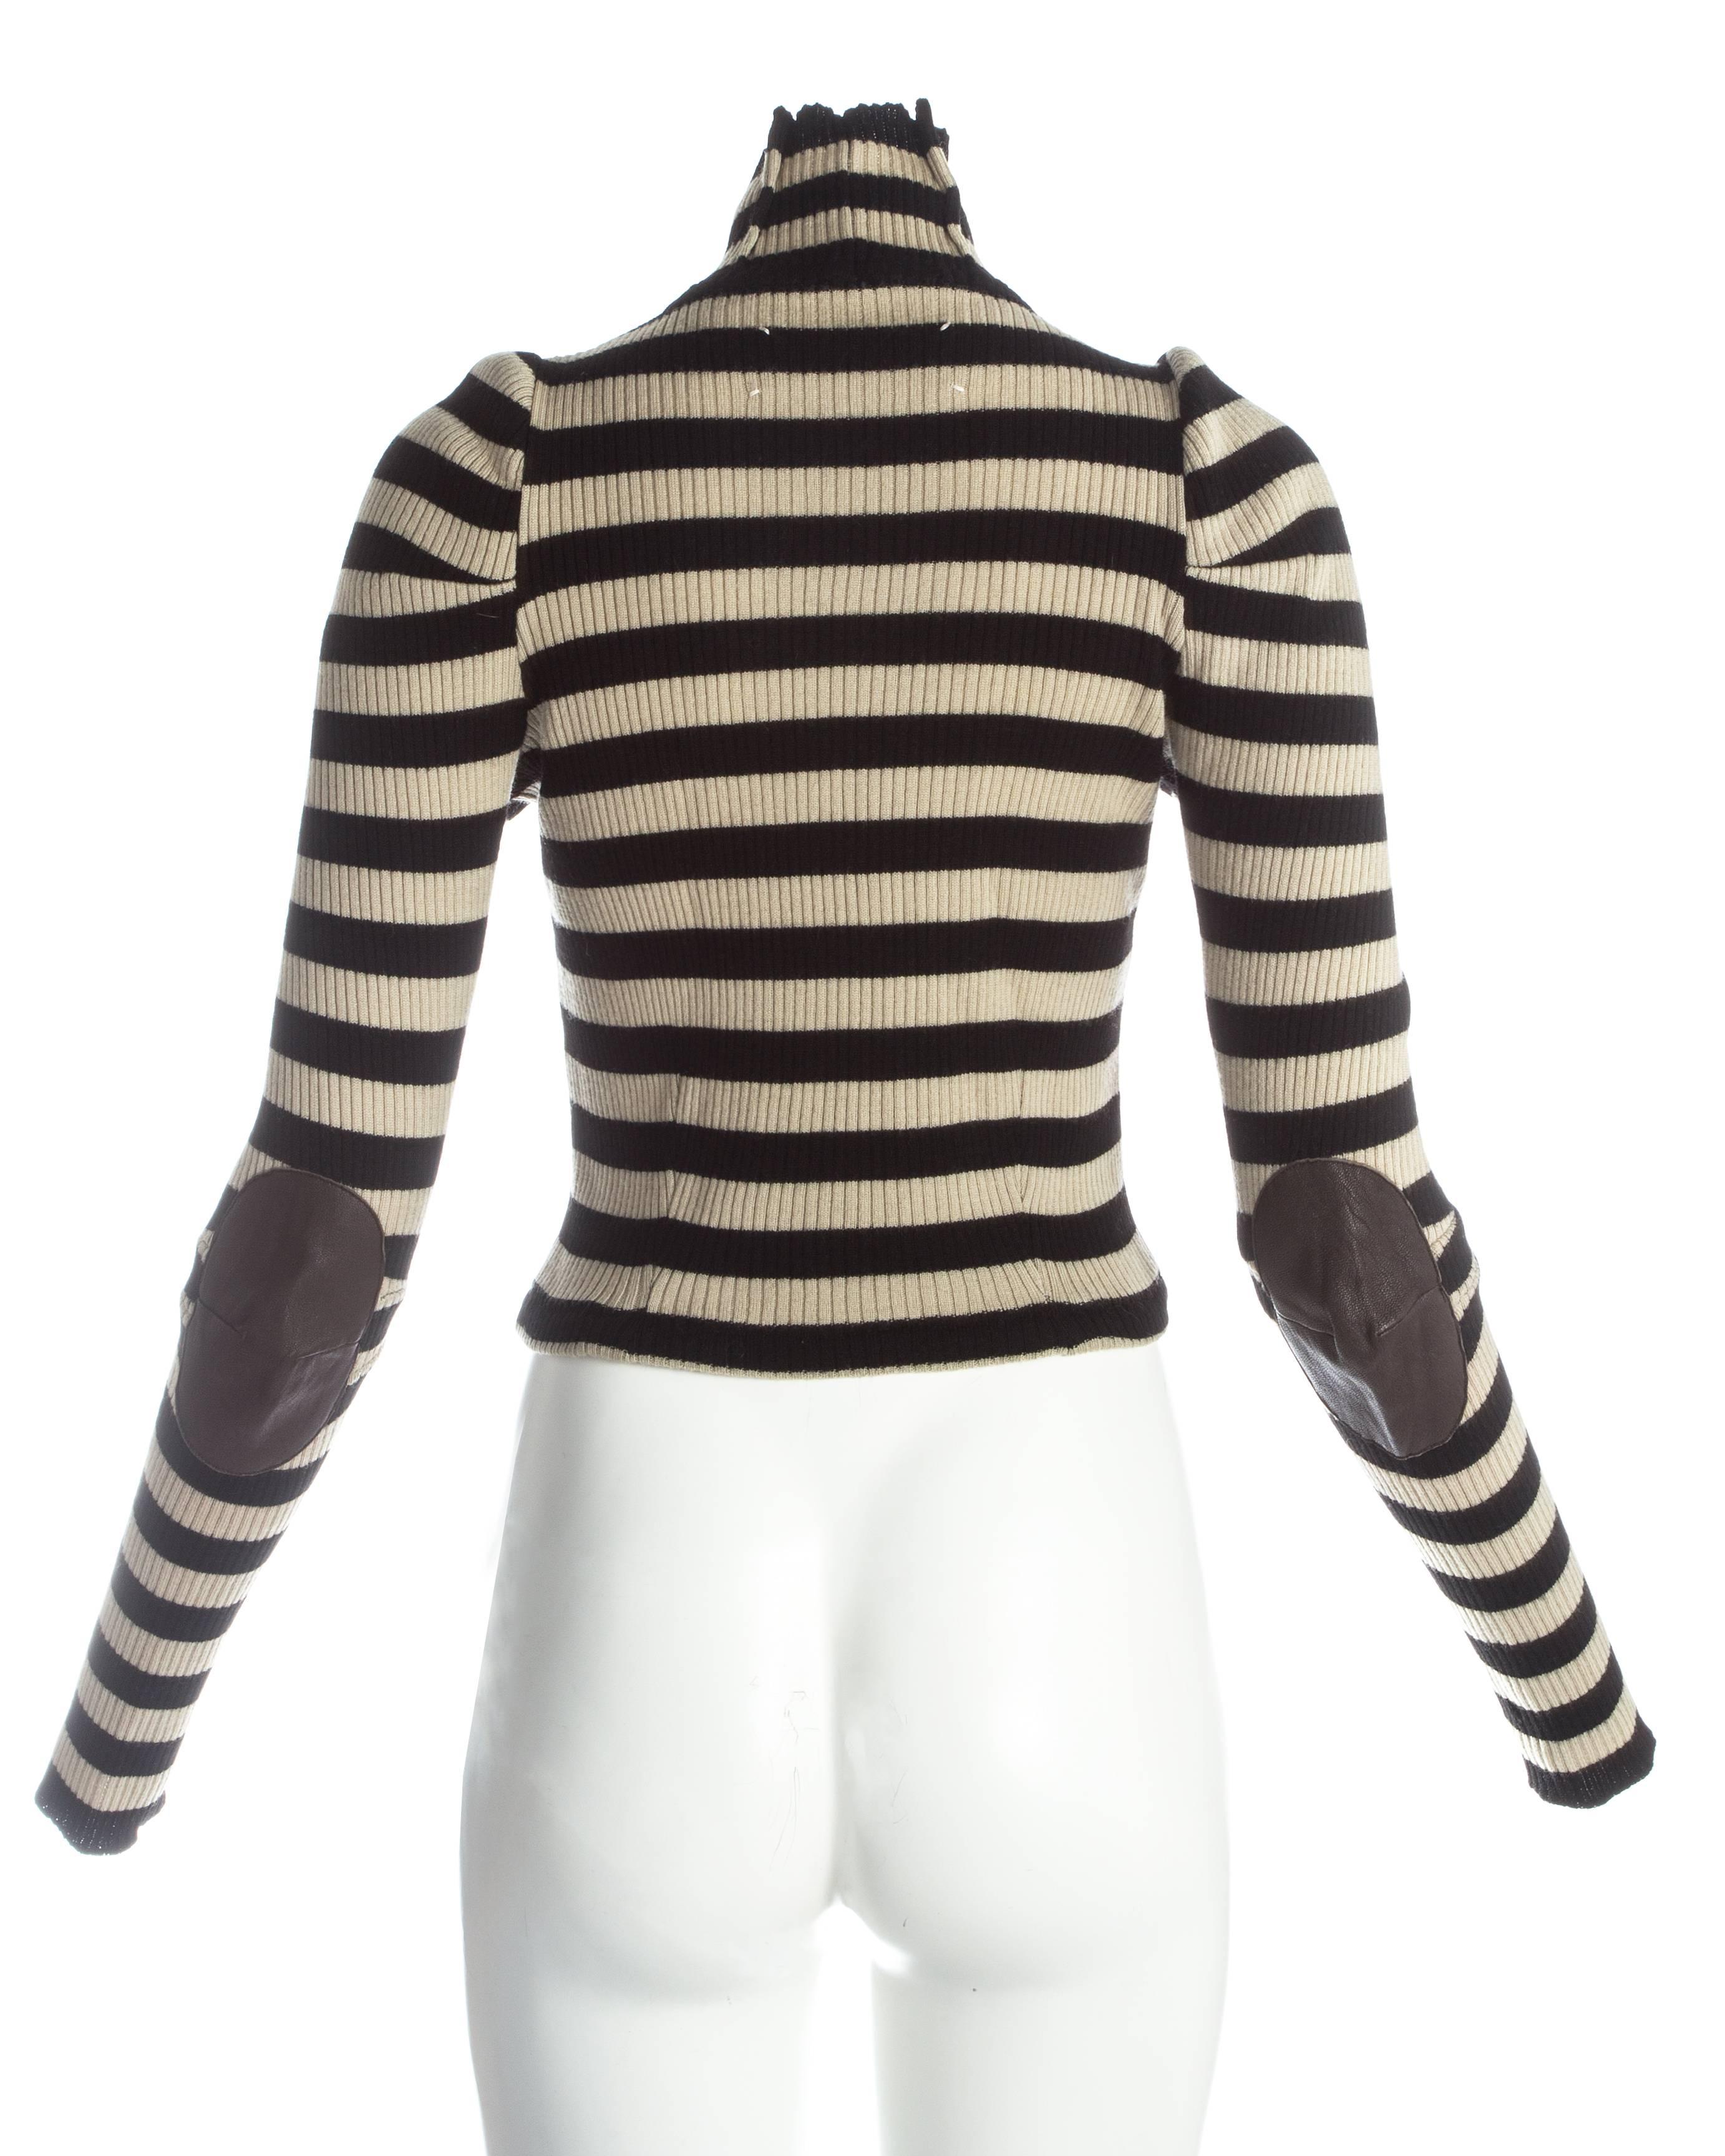 Margiela striped sweater with leather elbow patches and inverted darts, A/W 1989 1